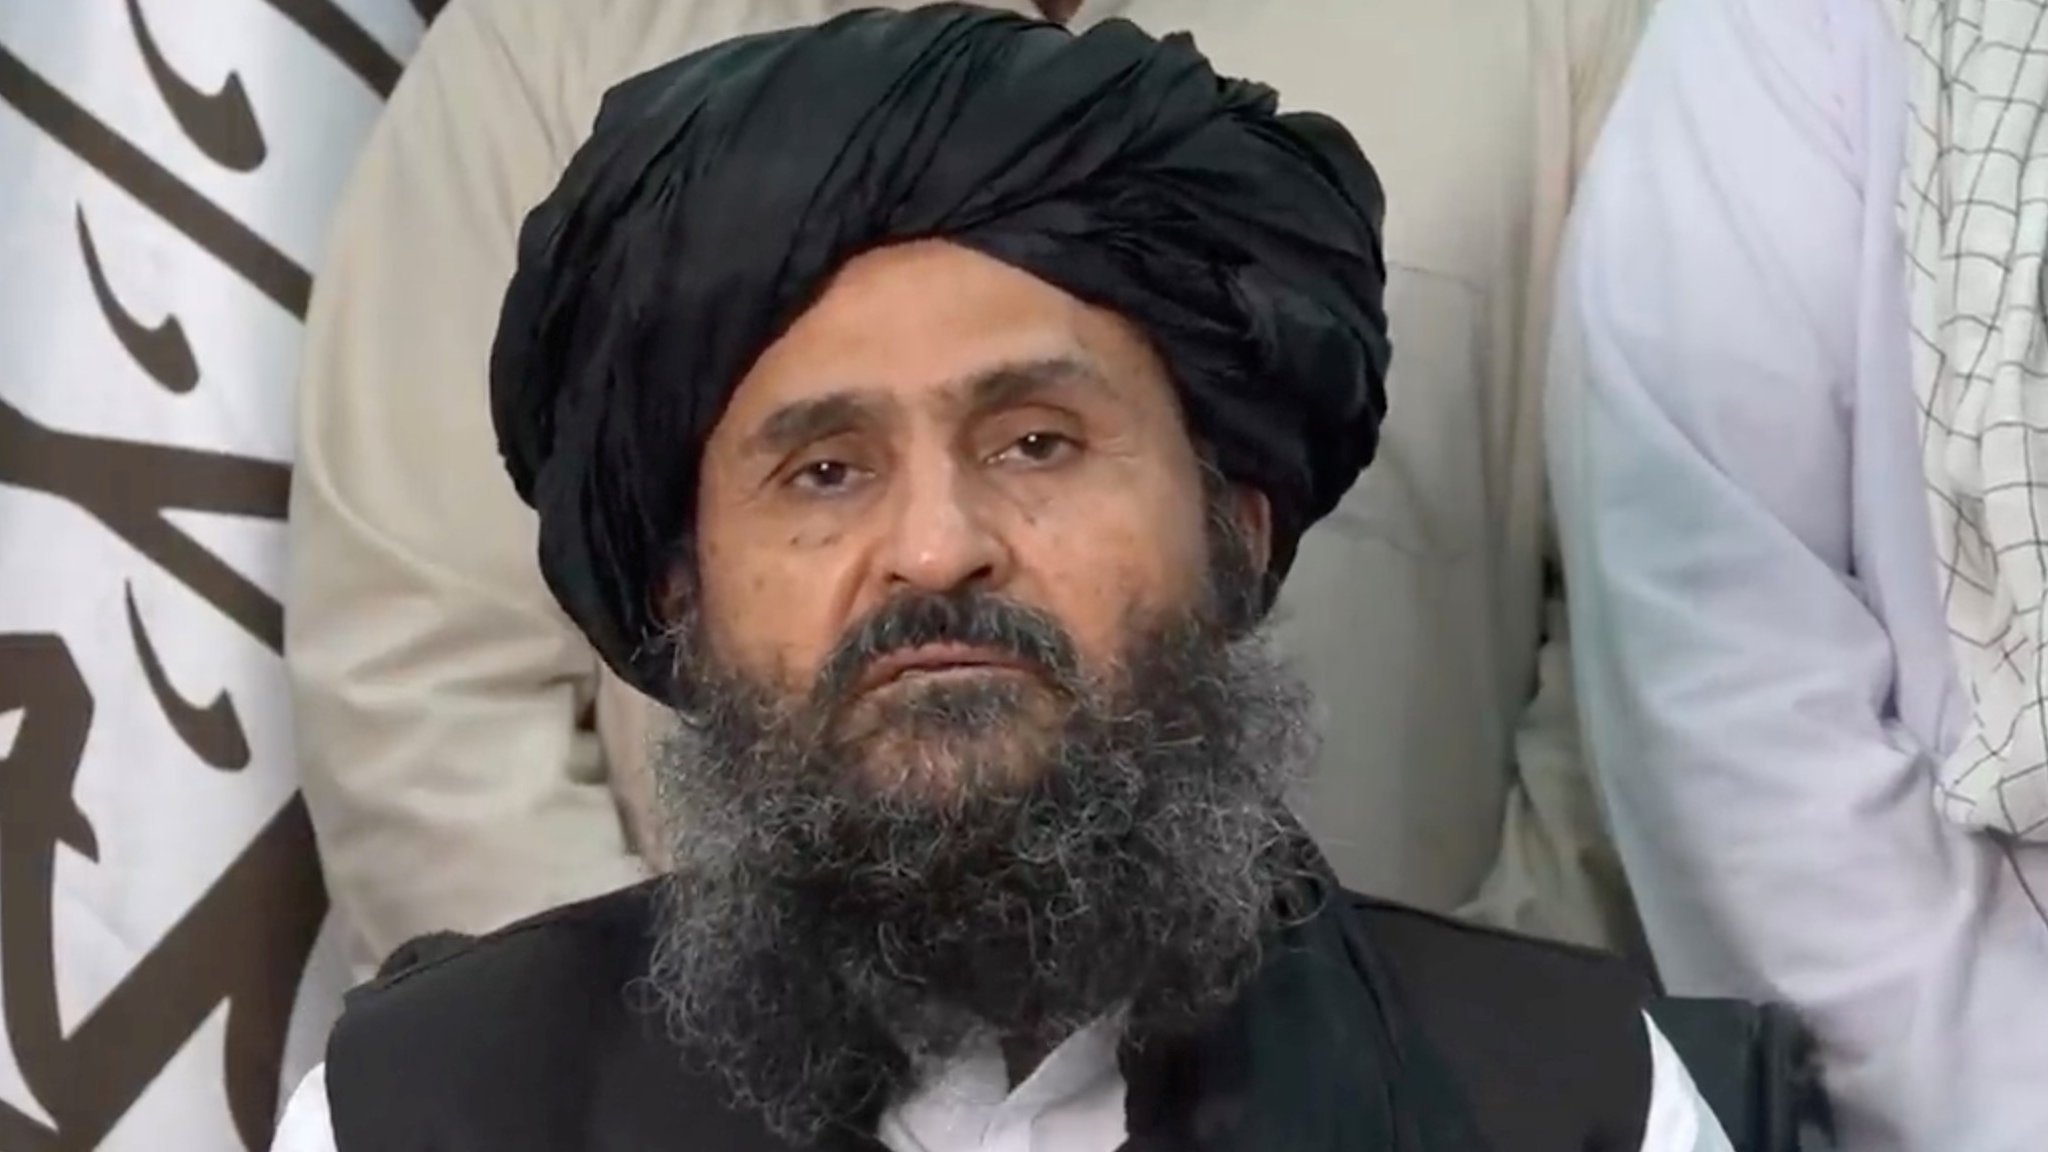 Mullah Baradar image taken from a video recorded in an unidentified location and released on August 16, 2021